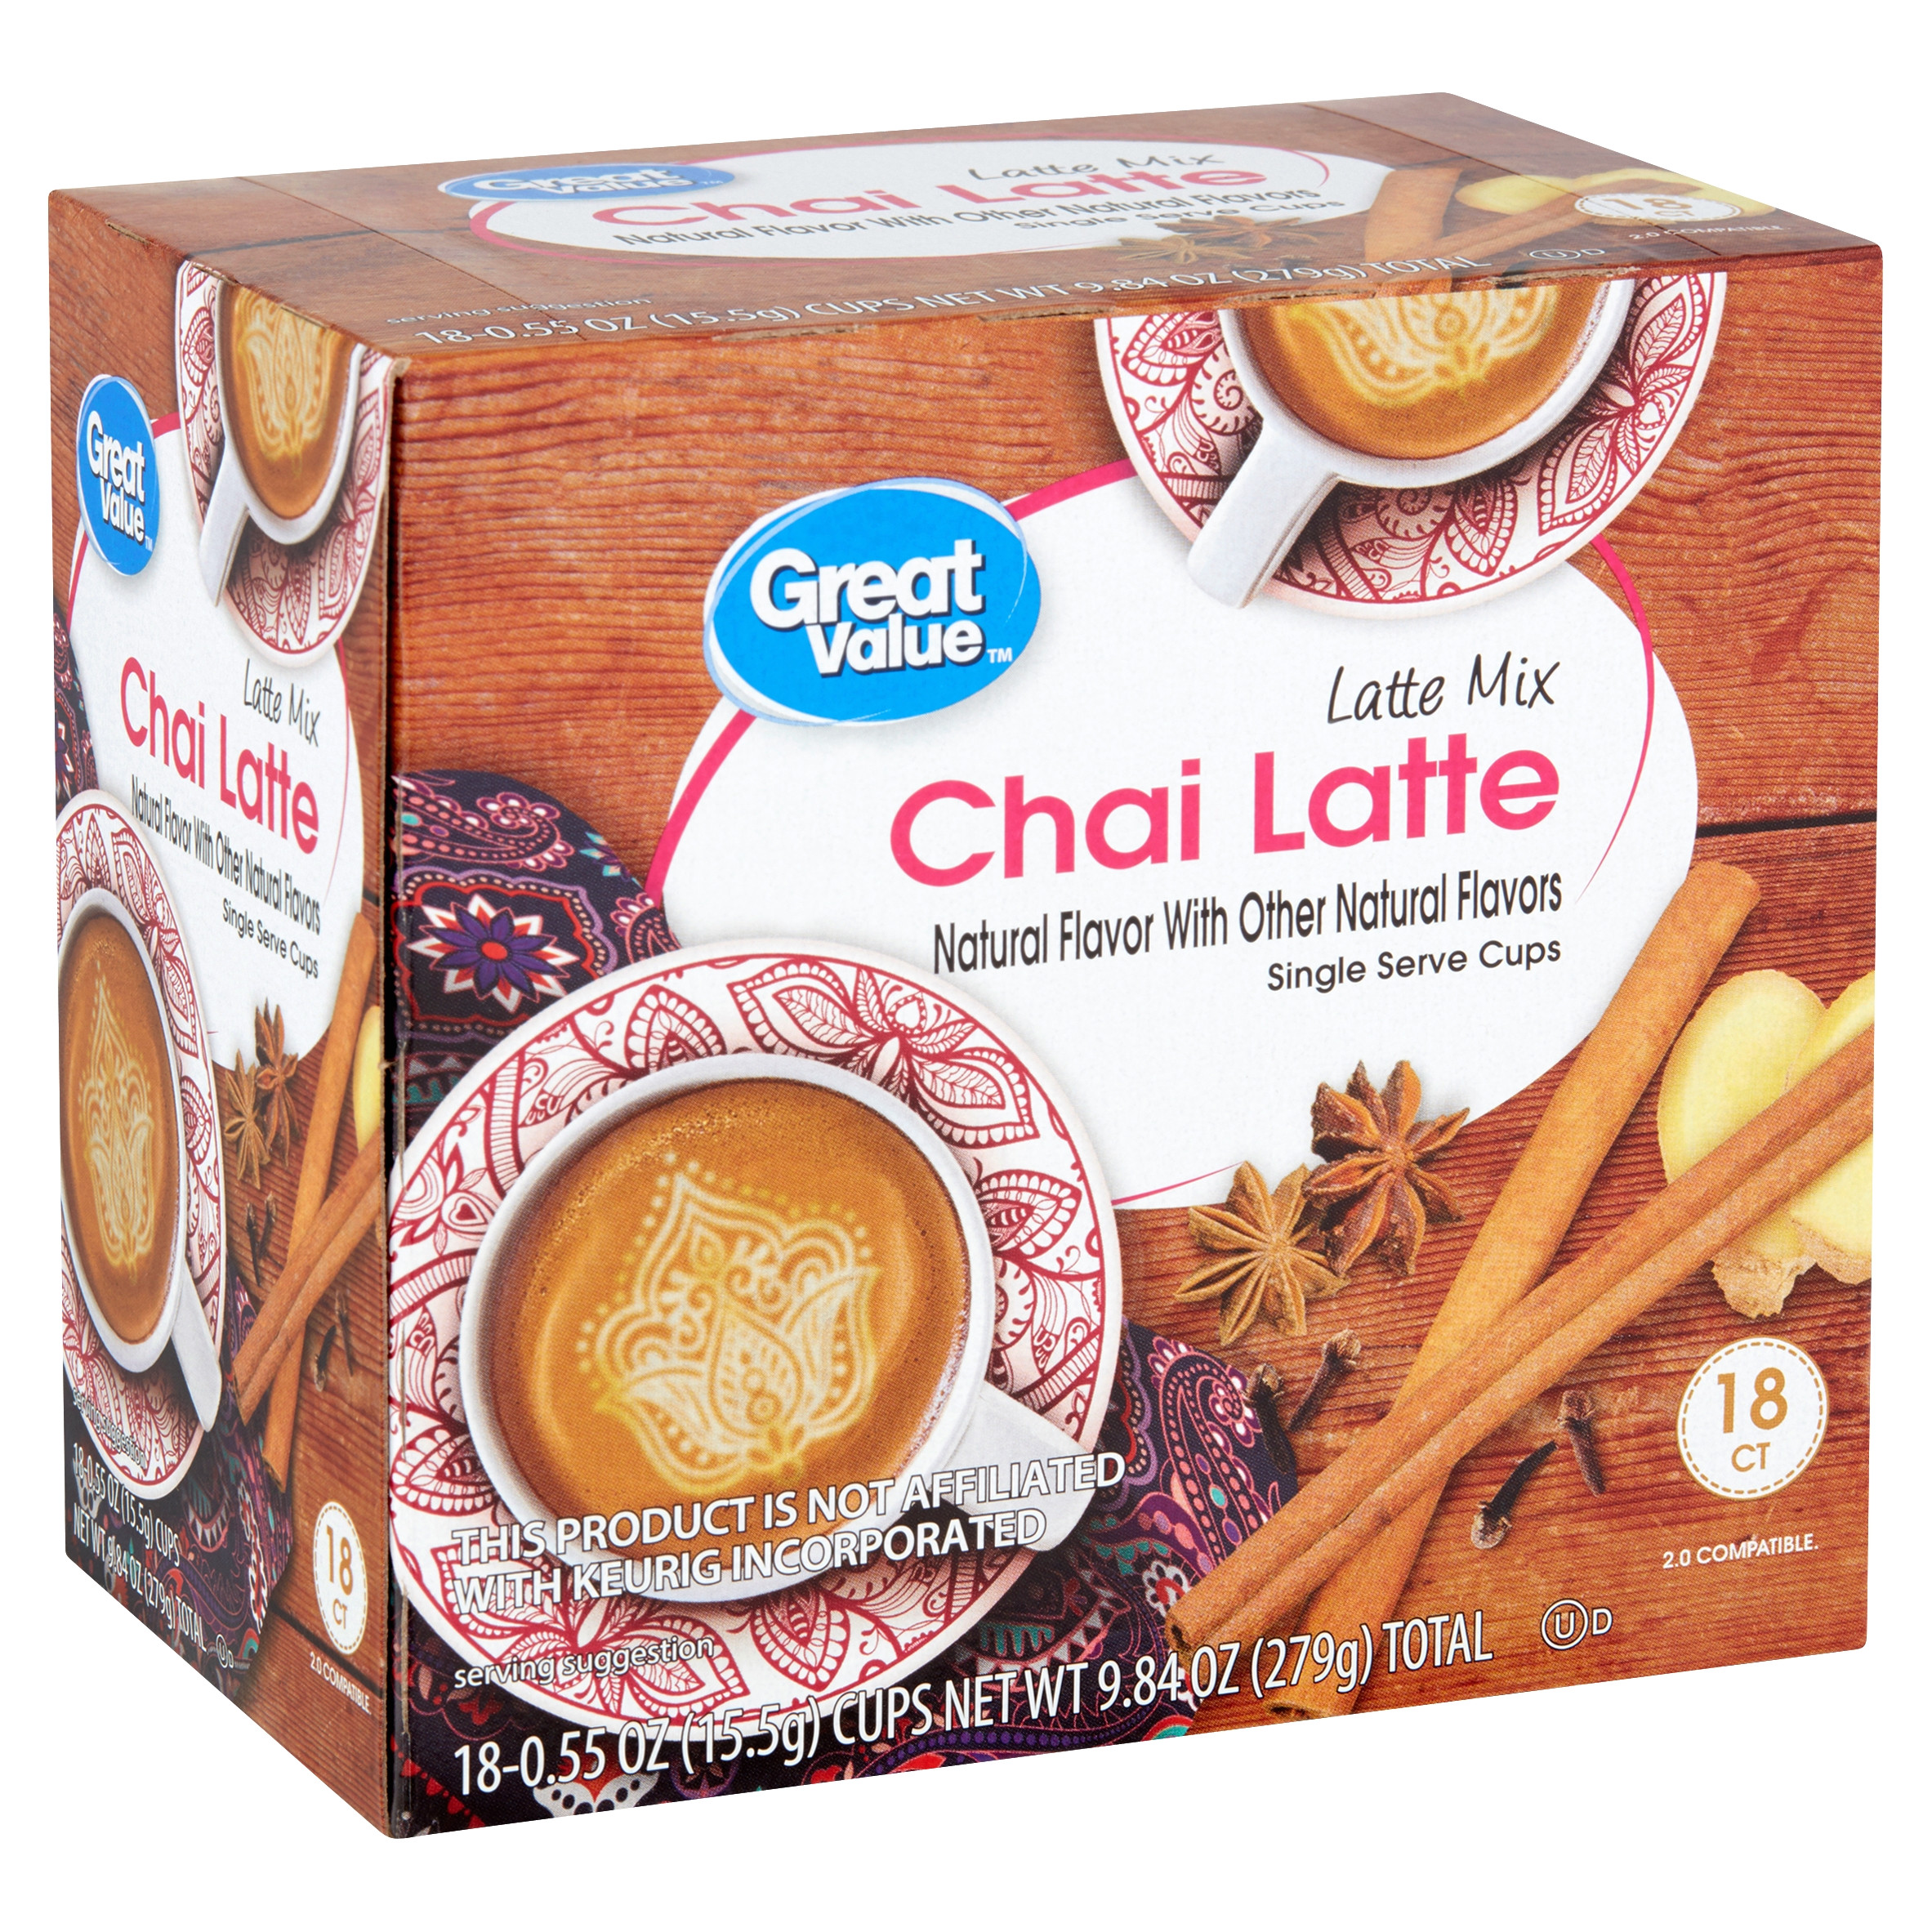 Who Buys Used Appliances In Gainesville Fl Great Value Chai Latte Mix 0 55 Oz 18 Count Walmart Com